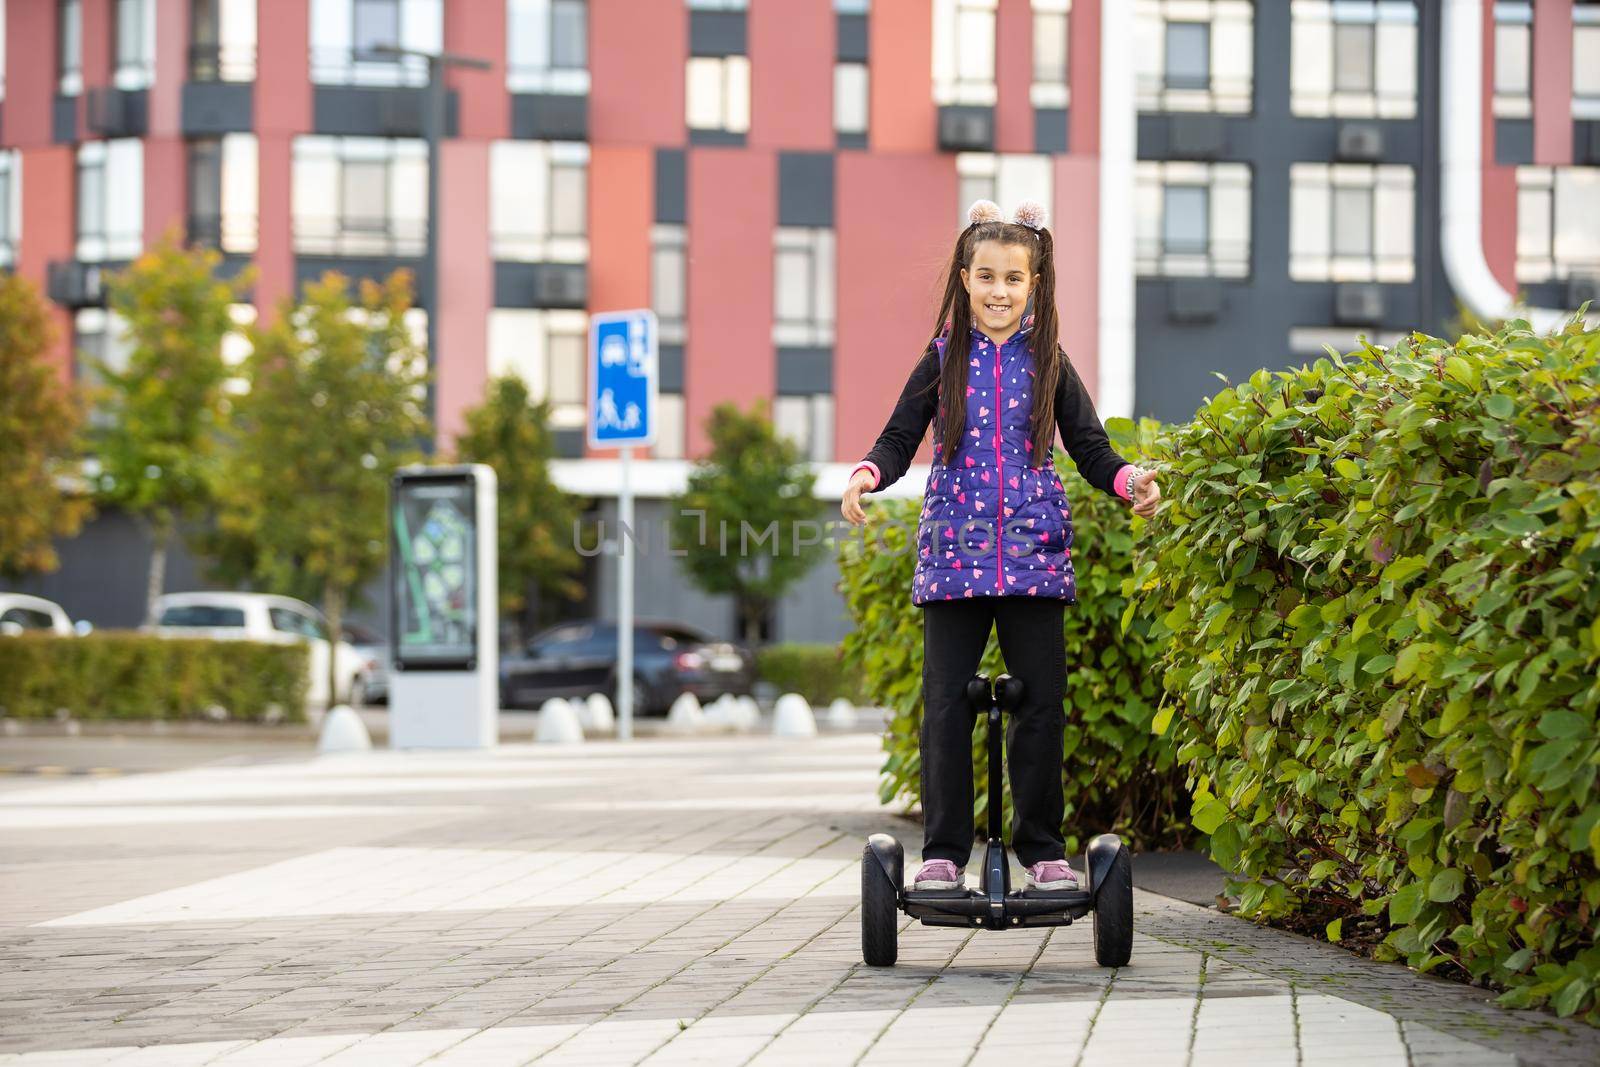 Happylittle girl standing on electric scooter outdoor by Andelov13